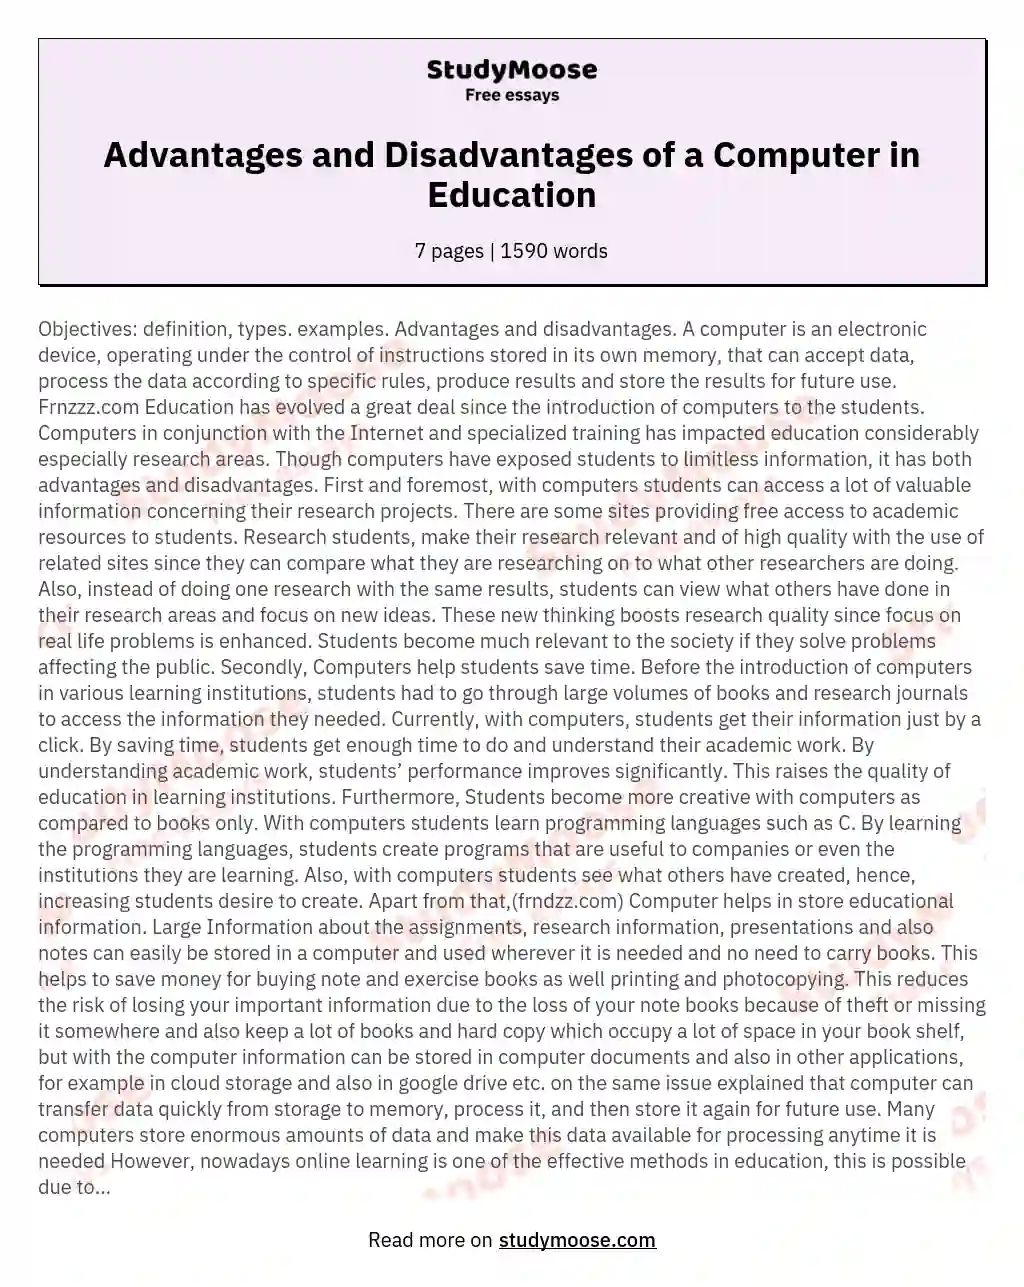 Advantages and Disadvantages of a Computer in Education